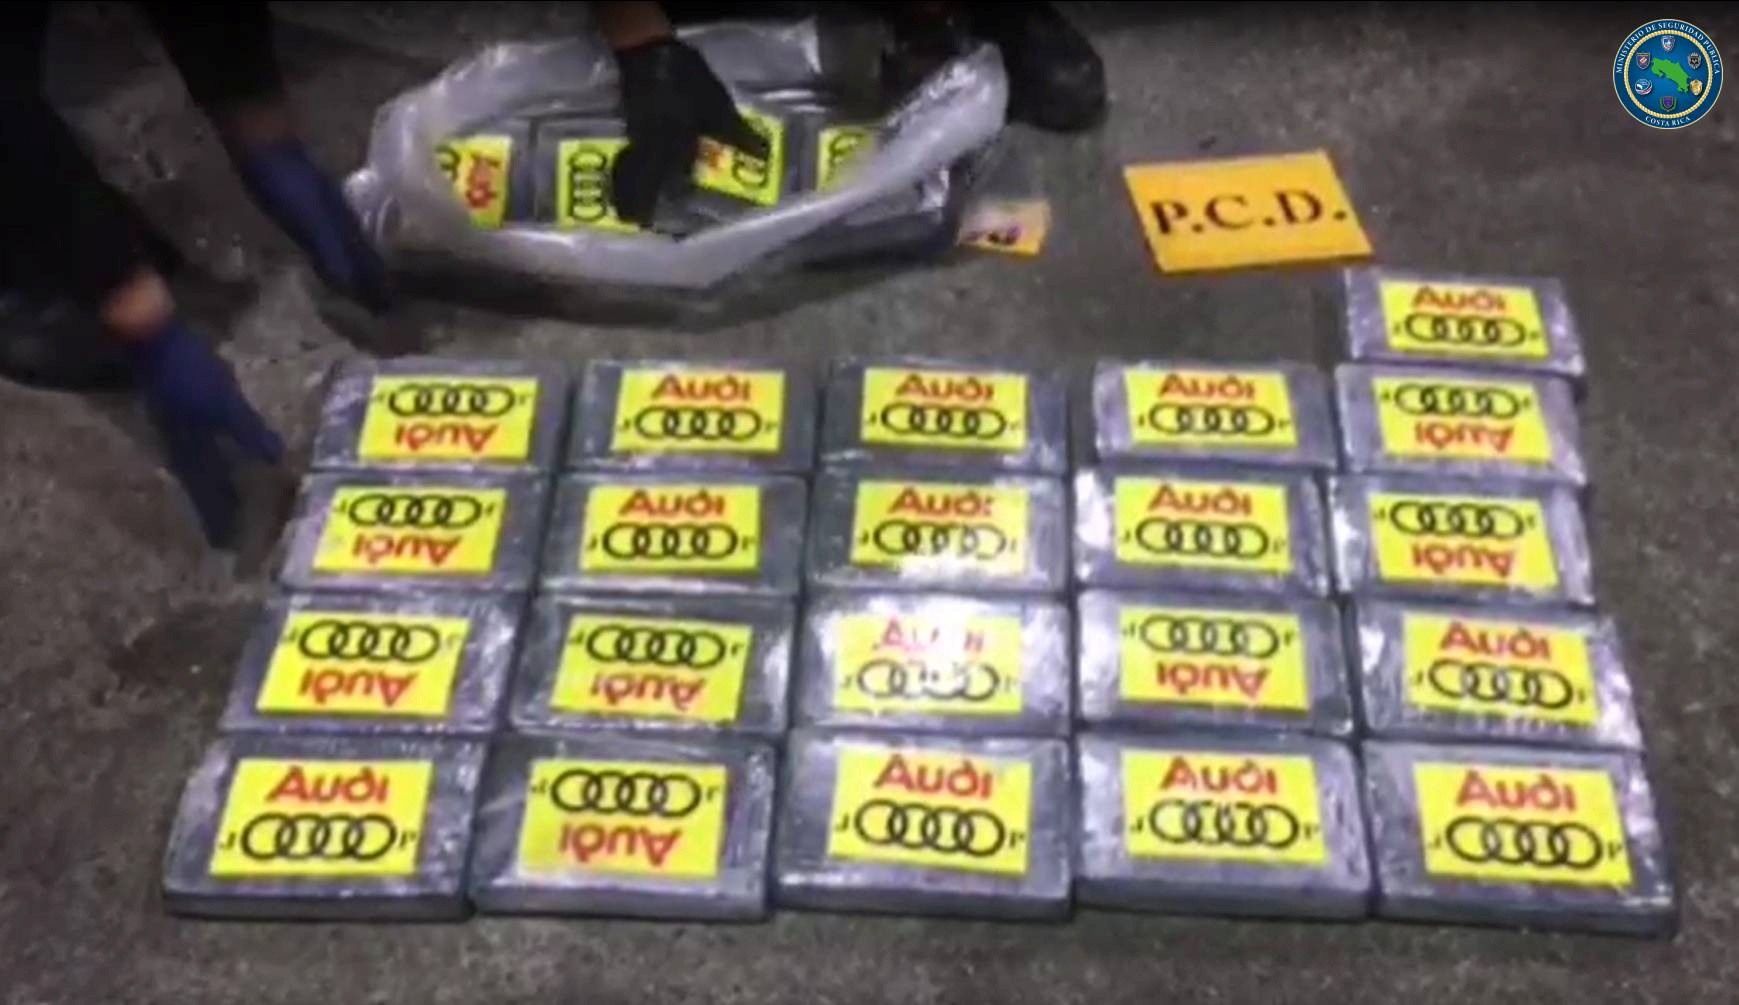 Police officers place packages containing cocaine seized during an operation of the Drug Control Police where 4.3 tones of cocaine was found hidden inside containers transported on a ship from Colombia, in Limon